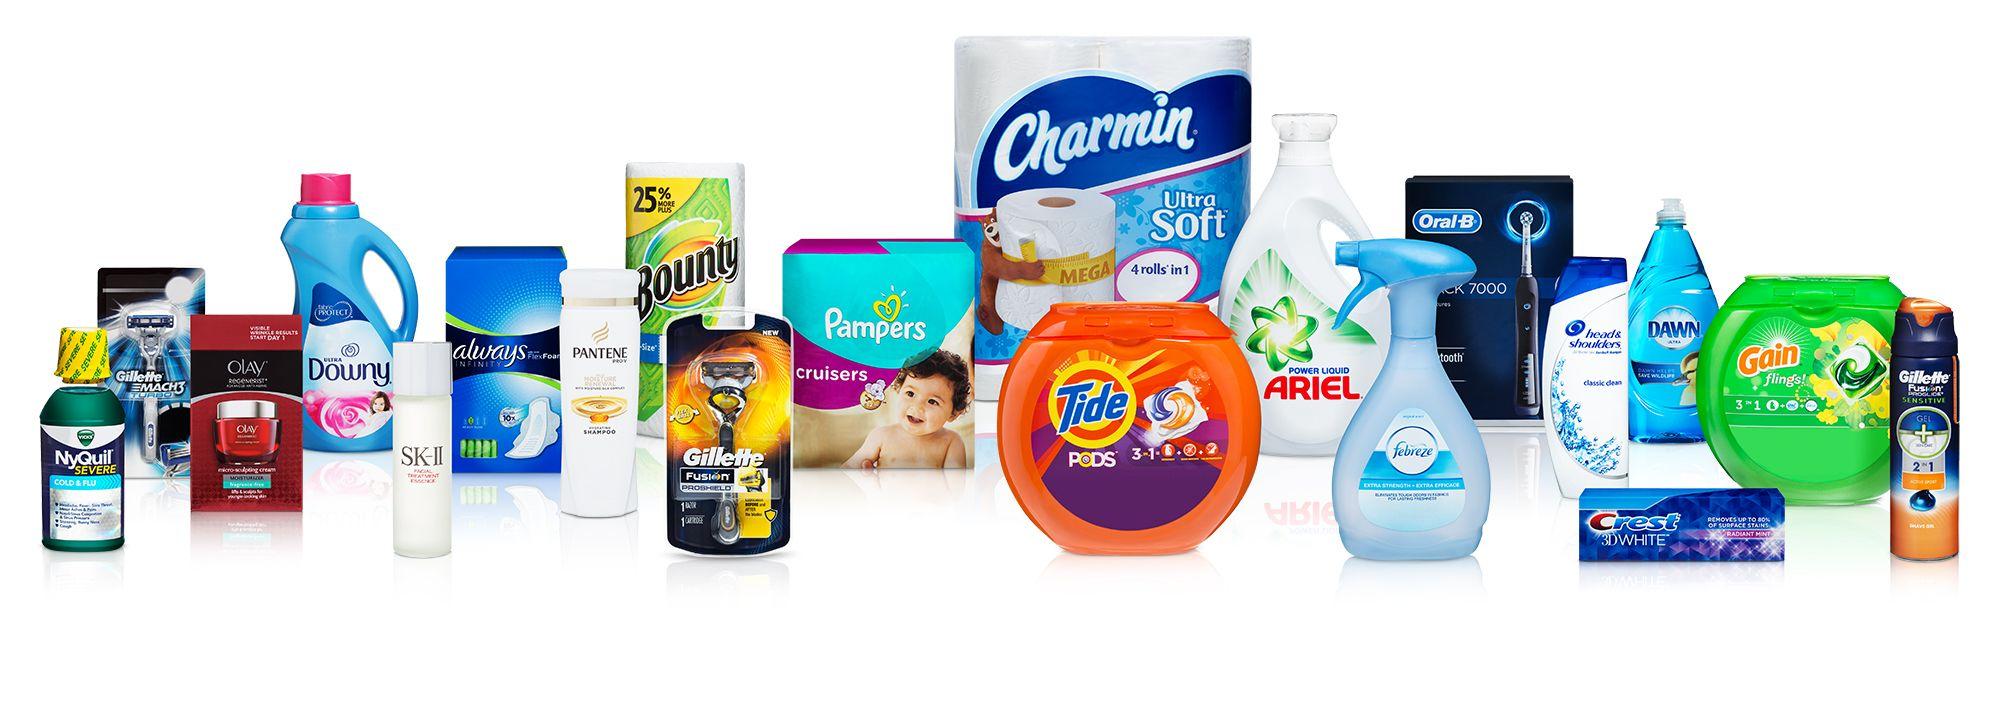 Procter and Gamble Brand Logo - Reasons To Not Buy Procter & Gamble Stock - The Motley Fool